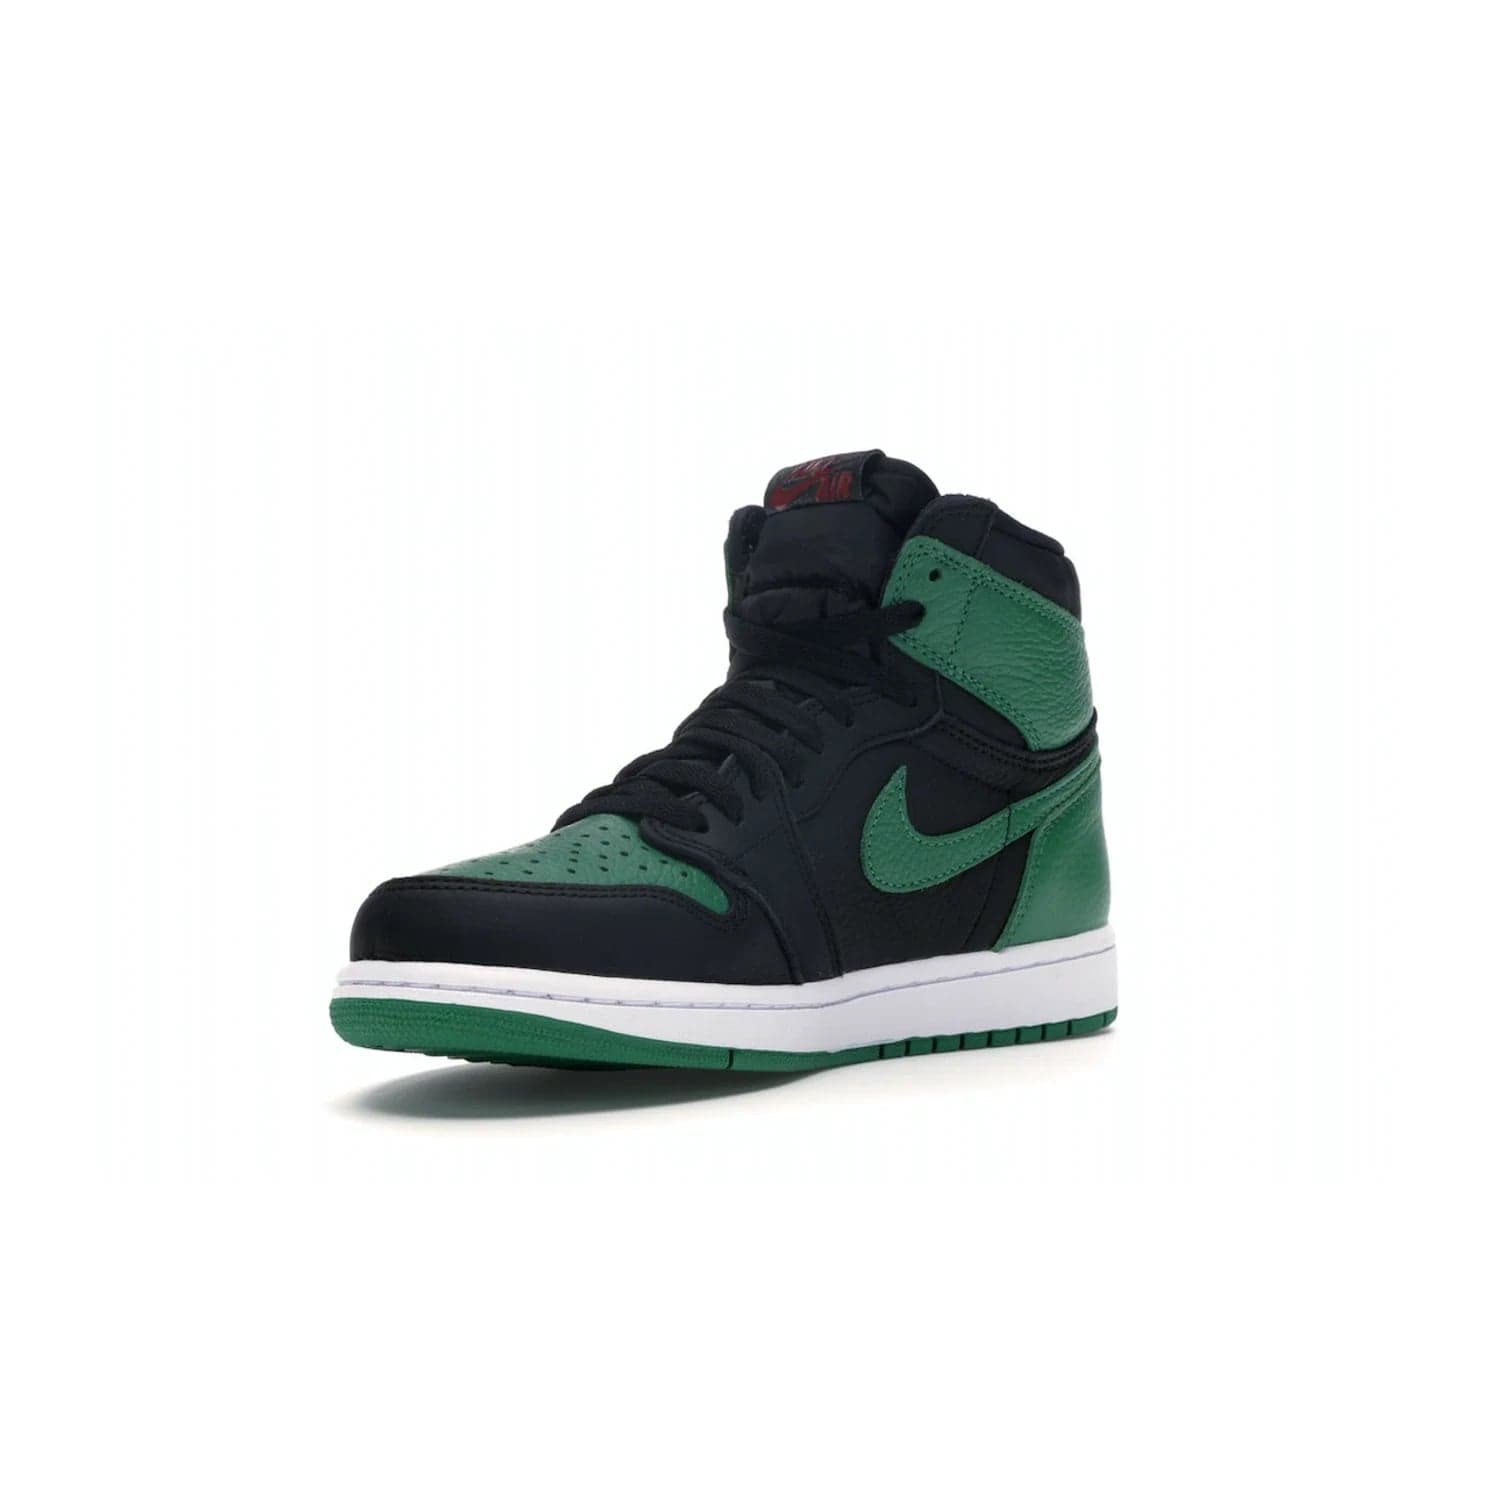 Jordan 1 Retro High Pine Green Black - Image 14 - Only at www.BallersClubKickz.com - Step into fresh style with the Jordan 1 Retro High Pine Green Black. Combining a black tumbled leather upper with green leather overlays, this sneaker features a Gym Red embroidered tongue tag, sail midsole, and pine green outsole for iconic style with a unique twist.